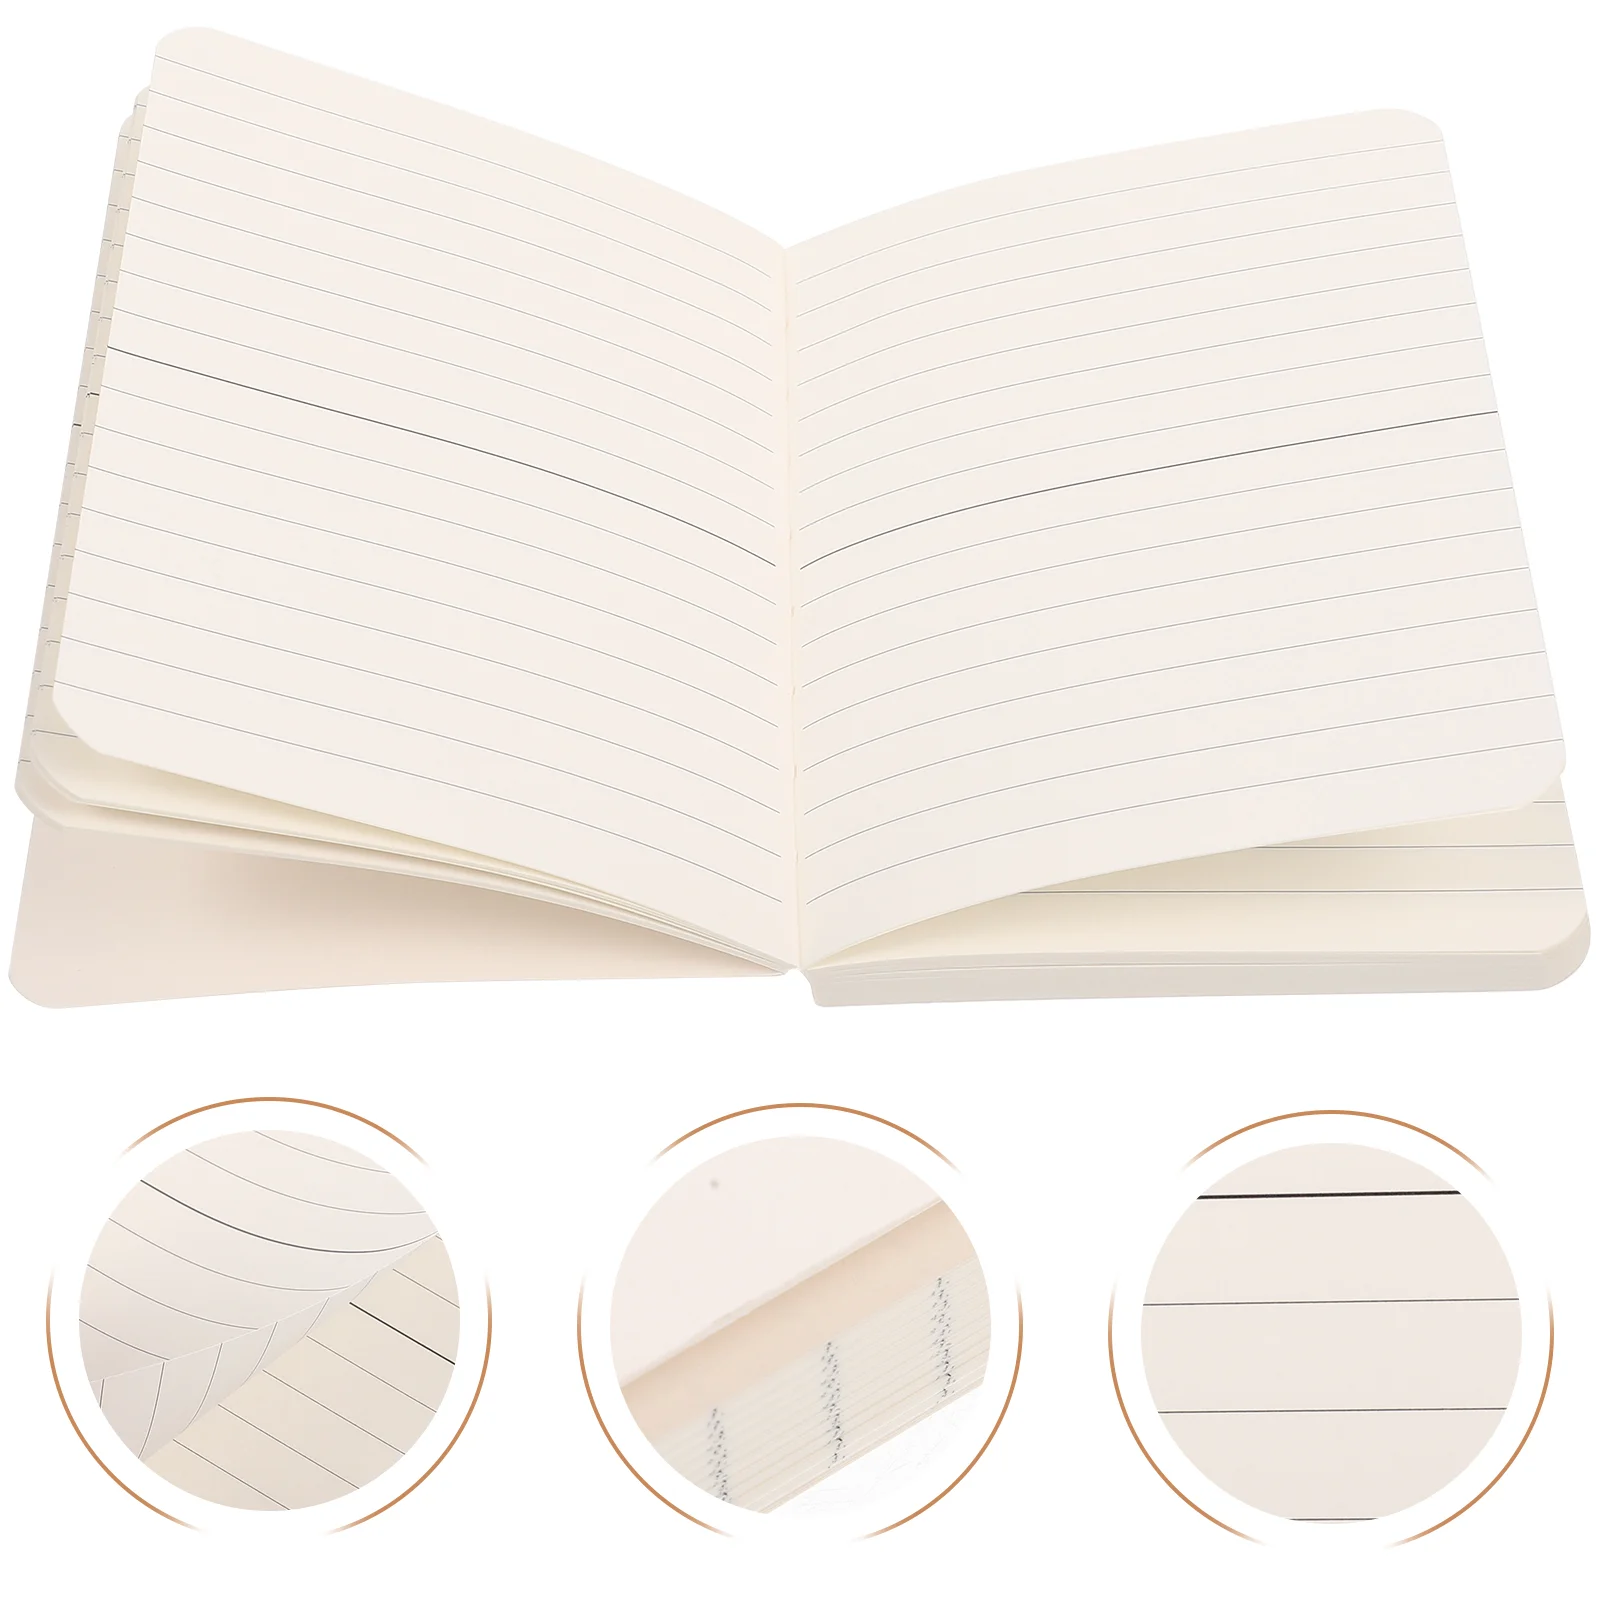 

1 Book of Replaceable Notebook Papers Convenient Bound Papers Professional Binder Papers Compact Lined Papers